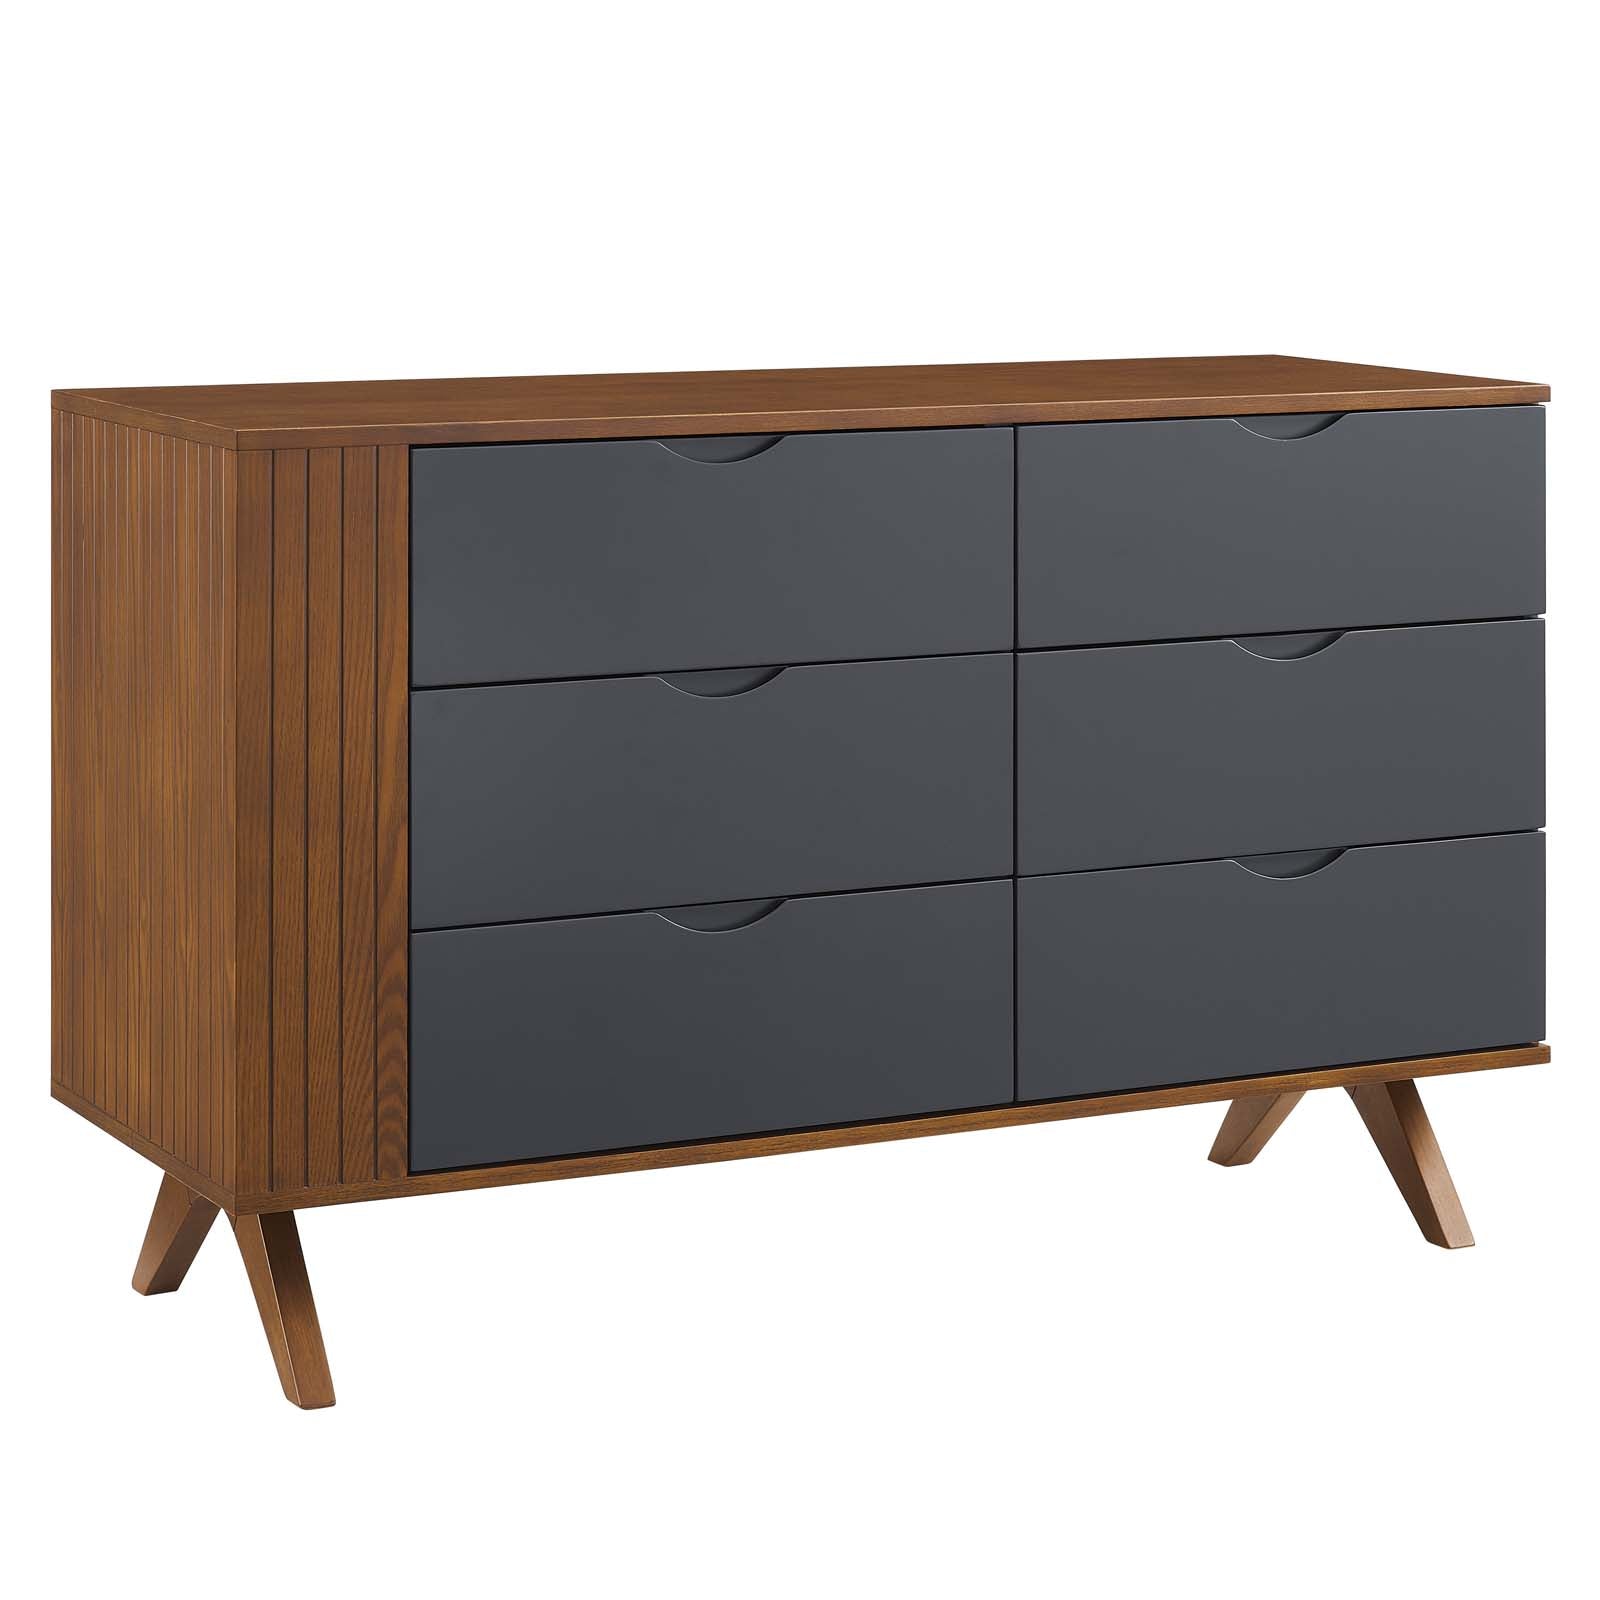 Dylan Dresser and Mirror - East Shore Modern Home Furnishings